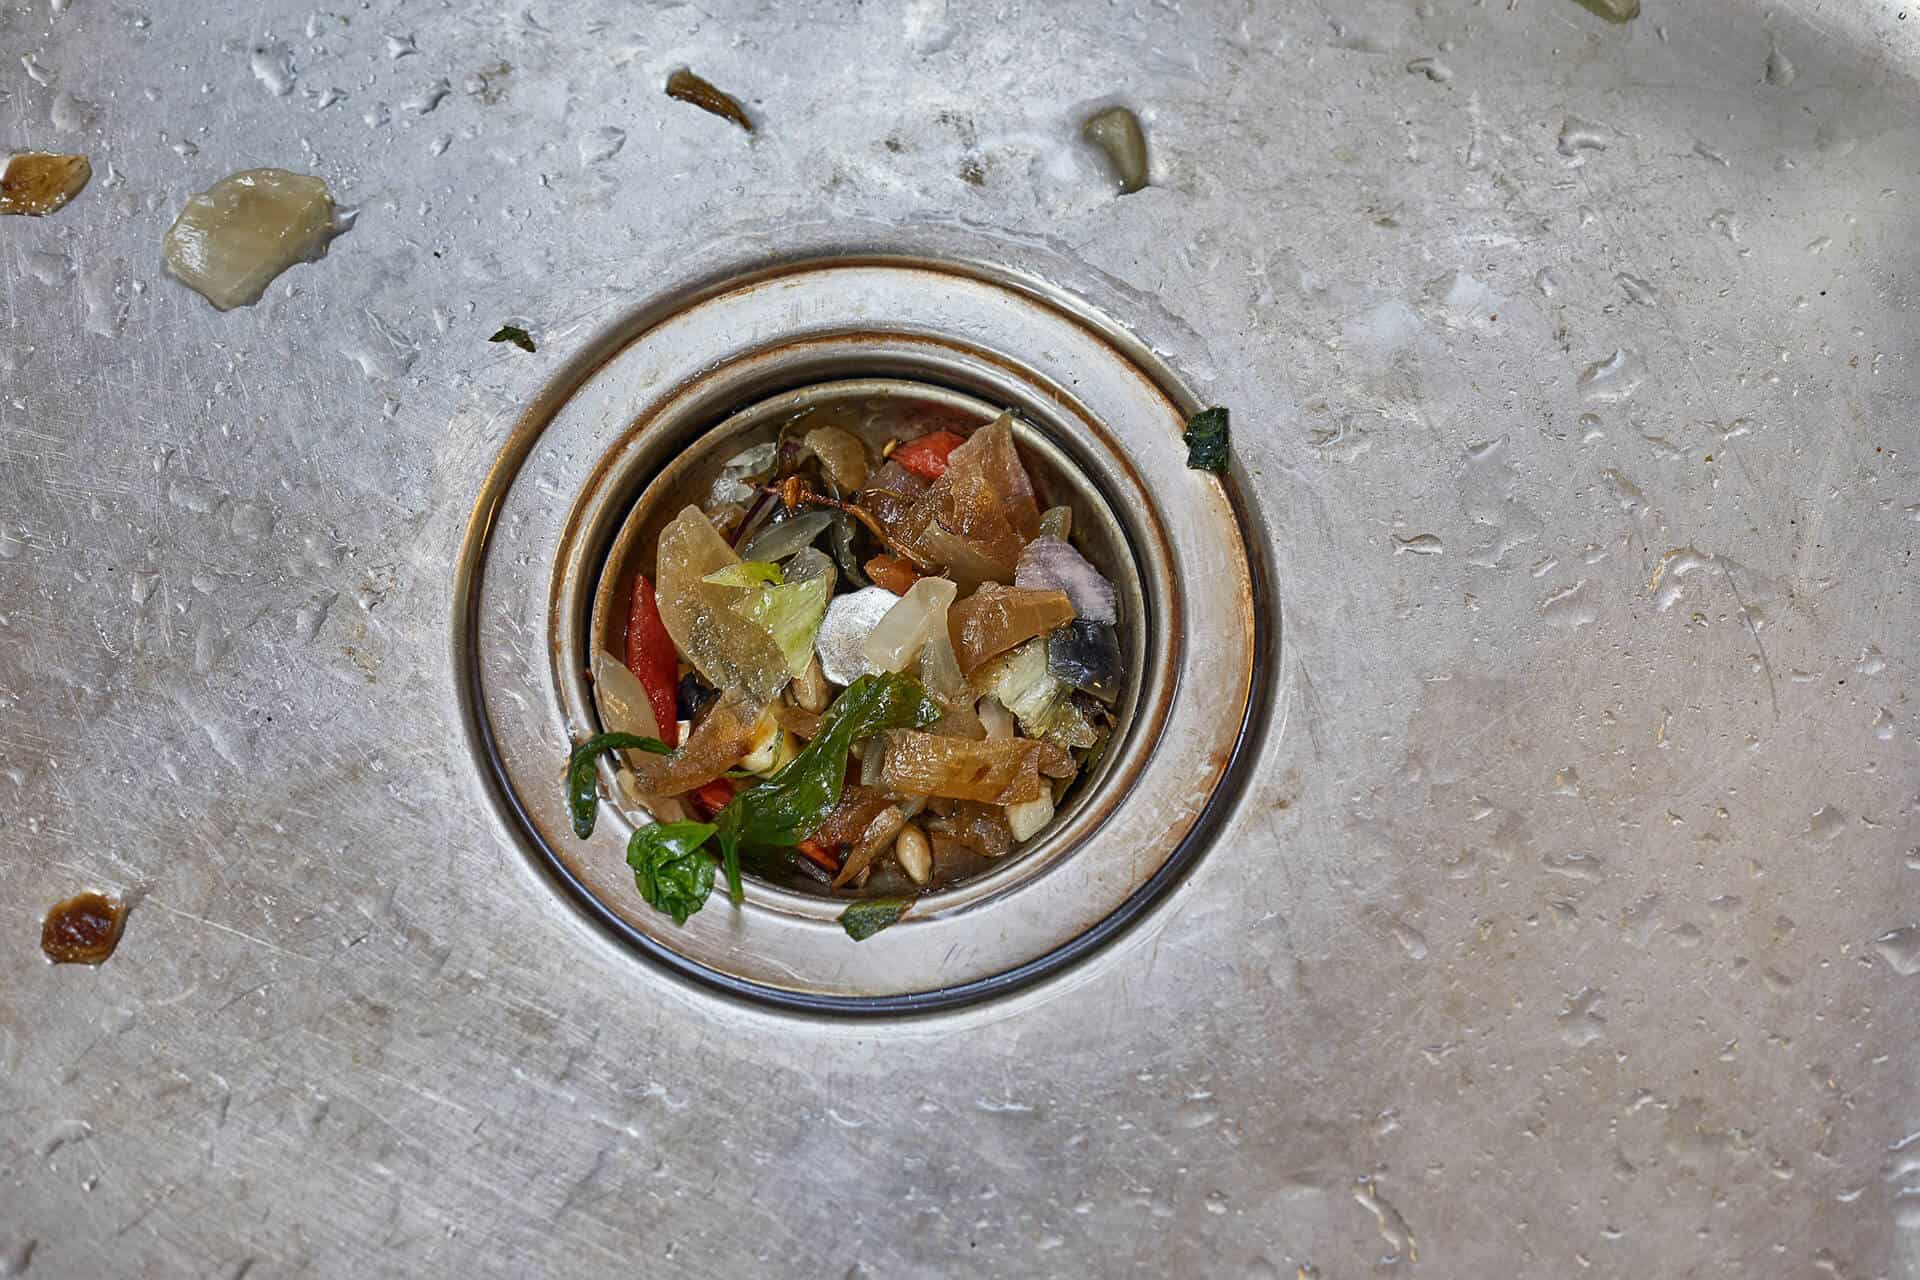 How To Maintain Your Garbage Disposal